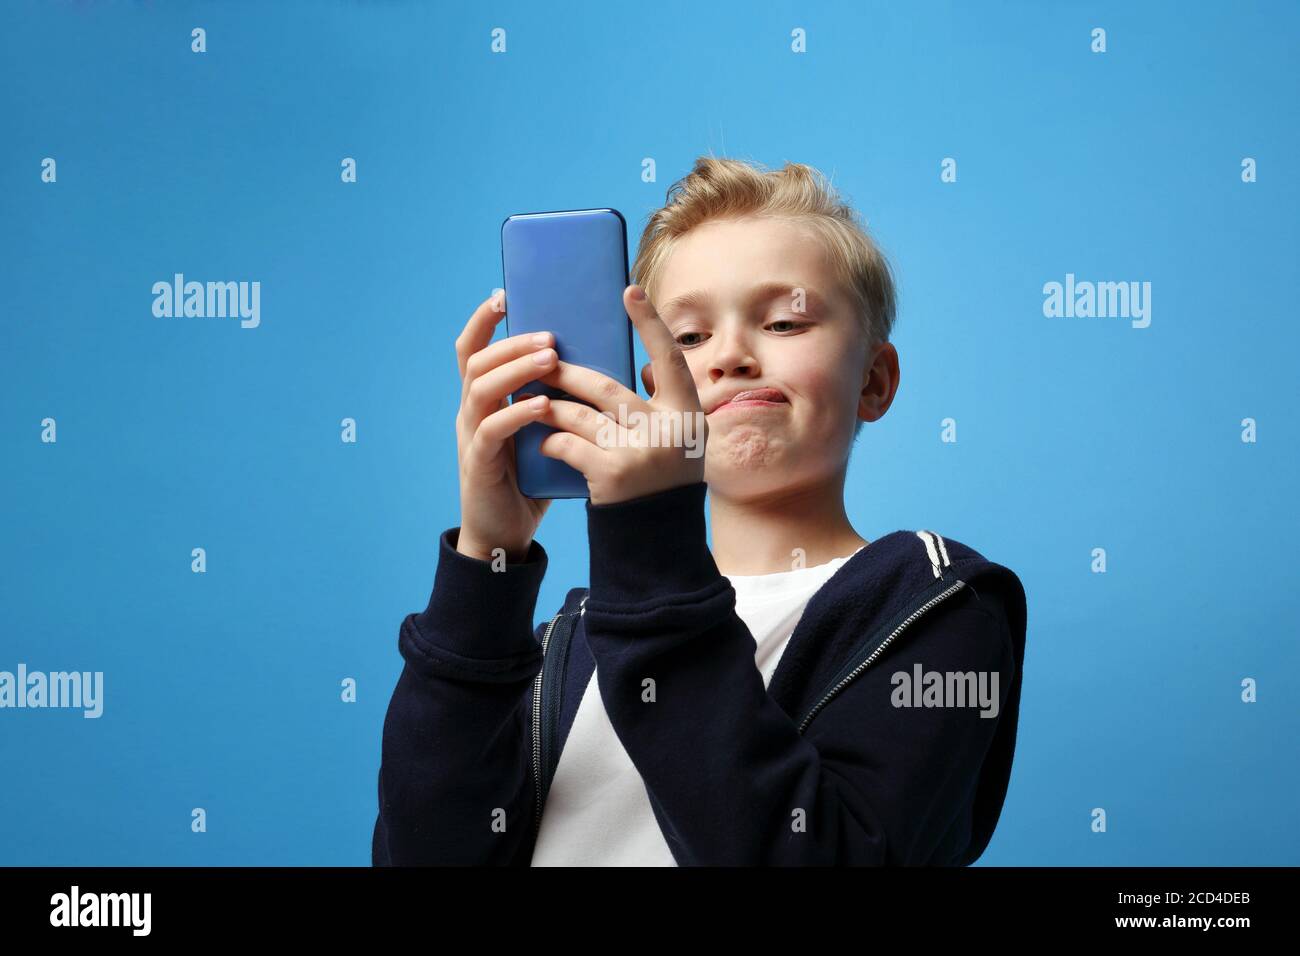 Child talking on a modern smartphone. Smartphone fun. A young boy playing with a smartphone.Portrait of a child on a colored blue background. Emotions Stock Photo